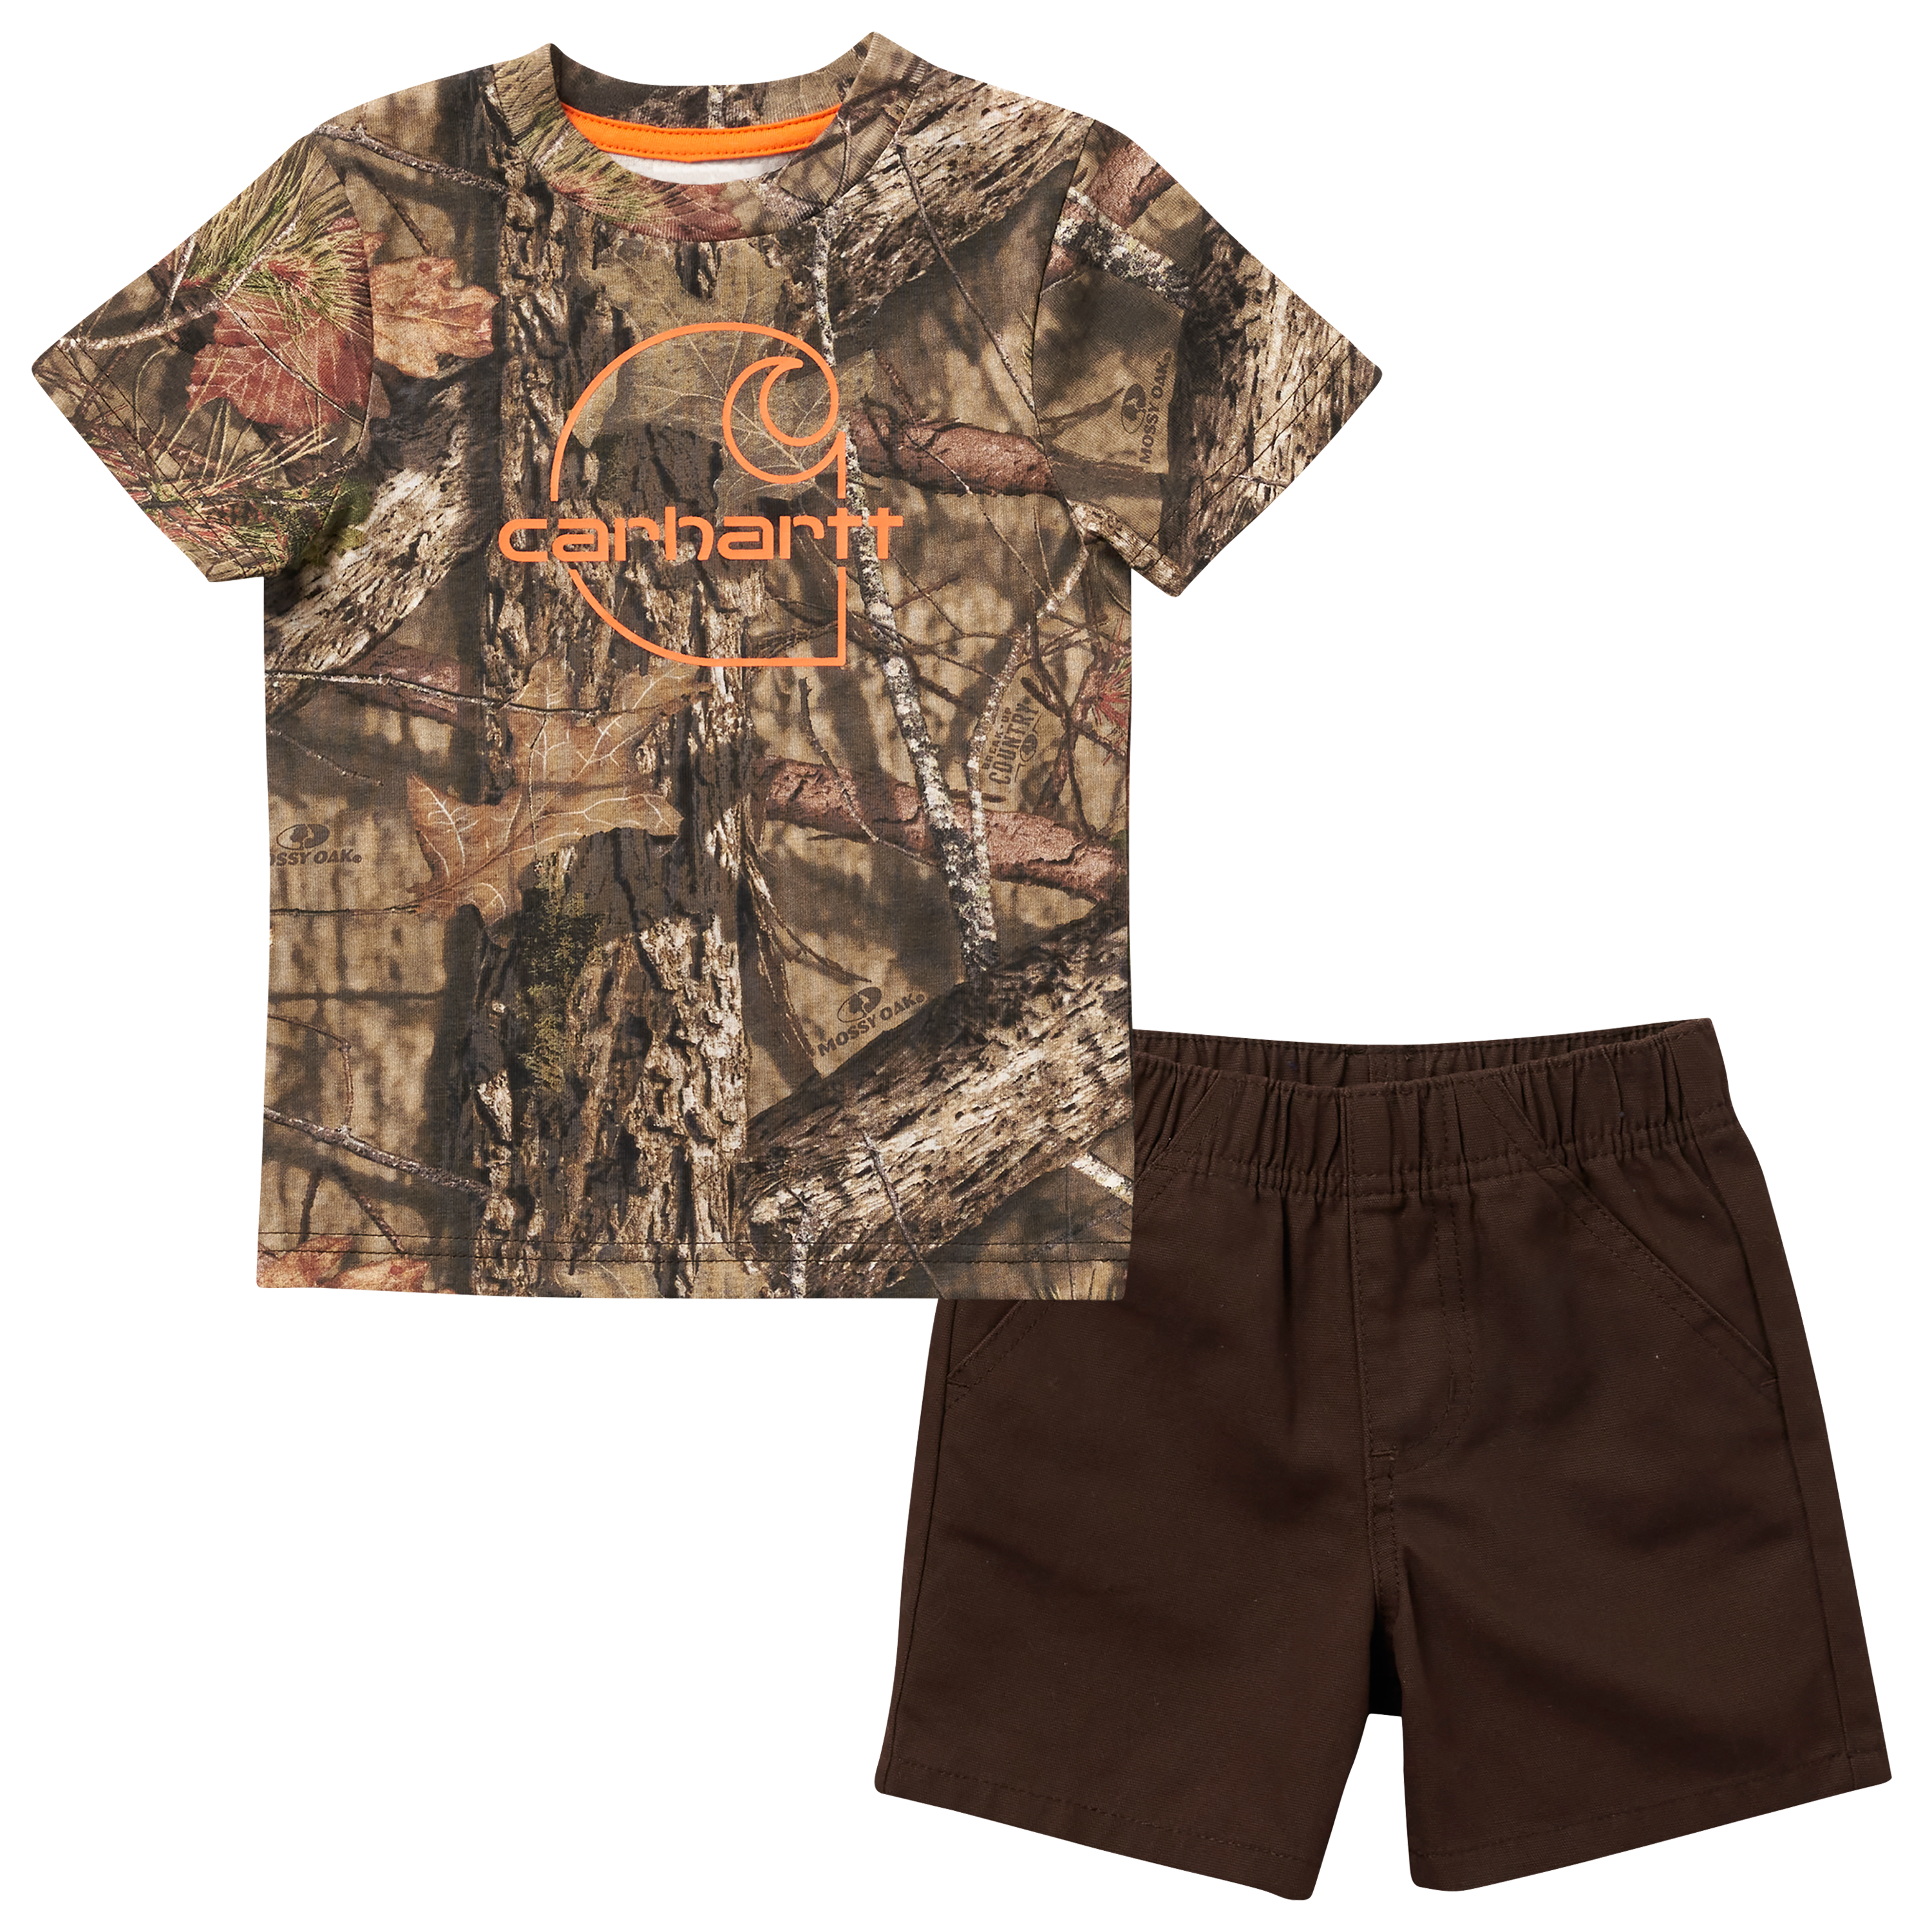 Carhartt Camo Short Sleeve T Shirt and Canvas Shorts Set for Baby Boys Mustang Brown/Mossy Oak Break Up Country 24 Months